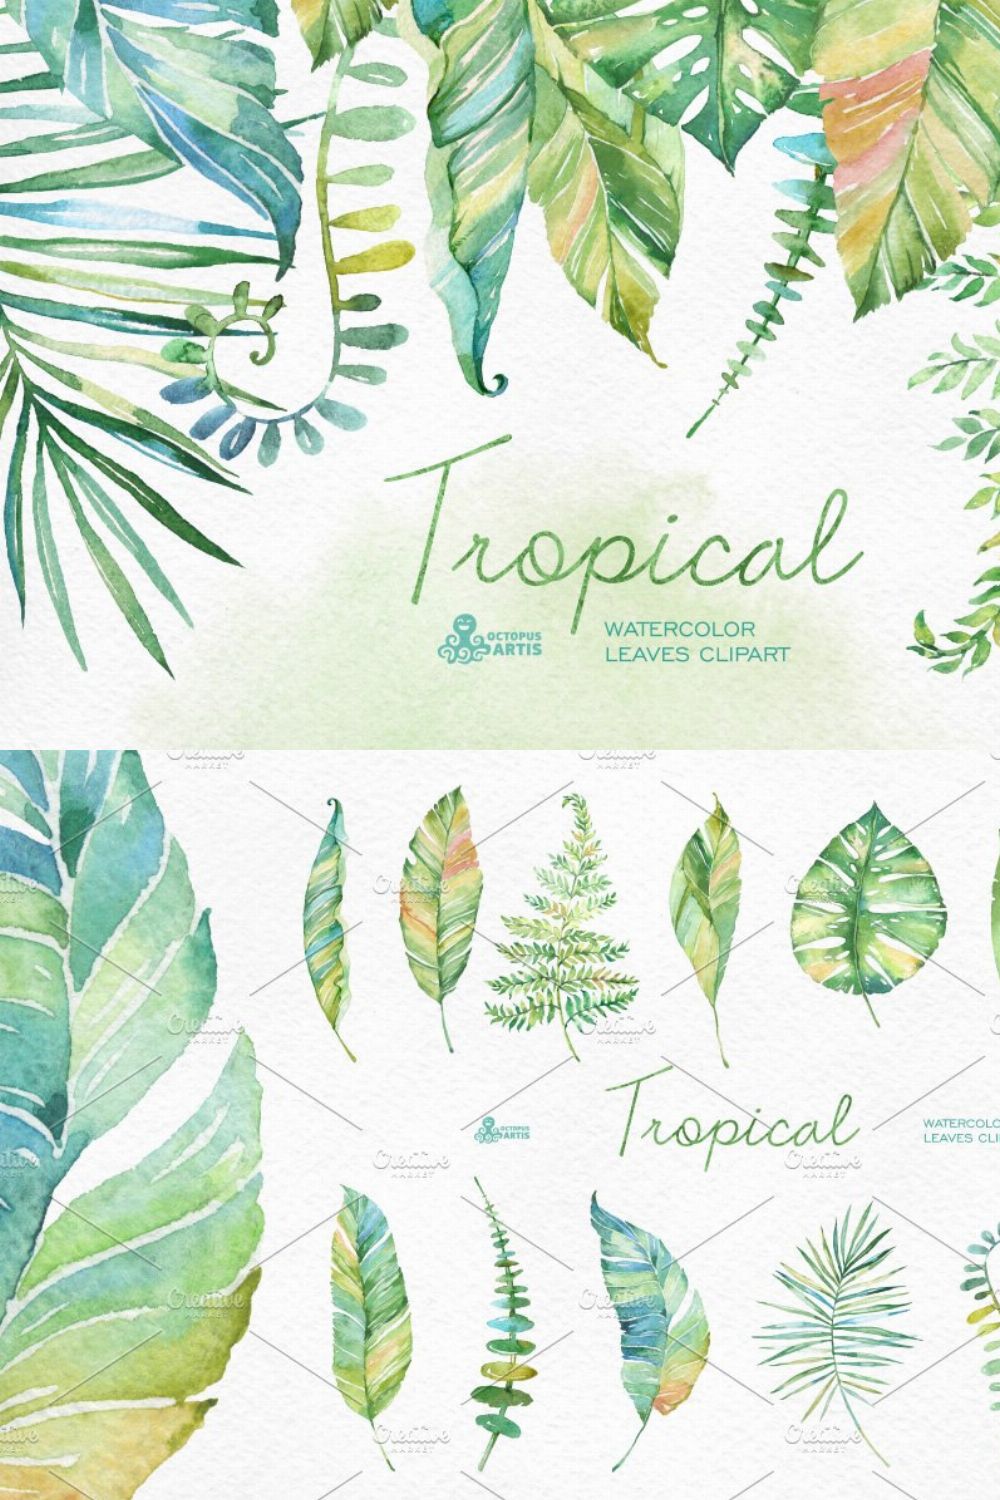 Tropical watercolor leaves pinterest preview image.